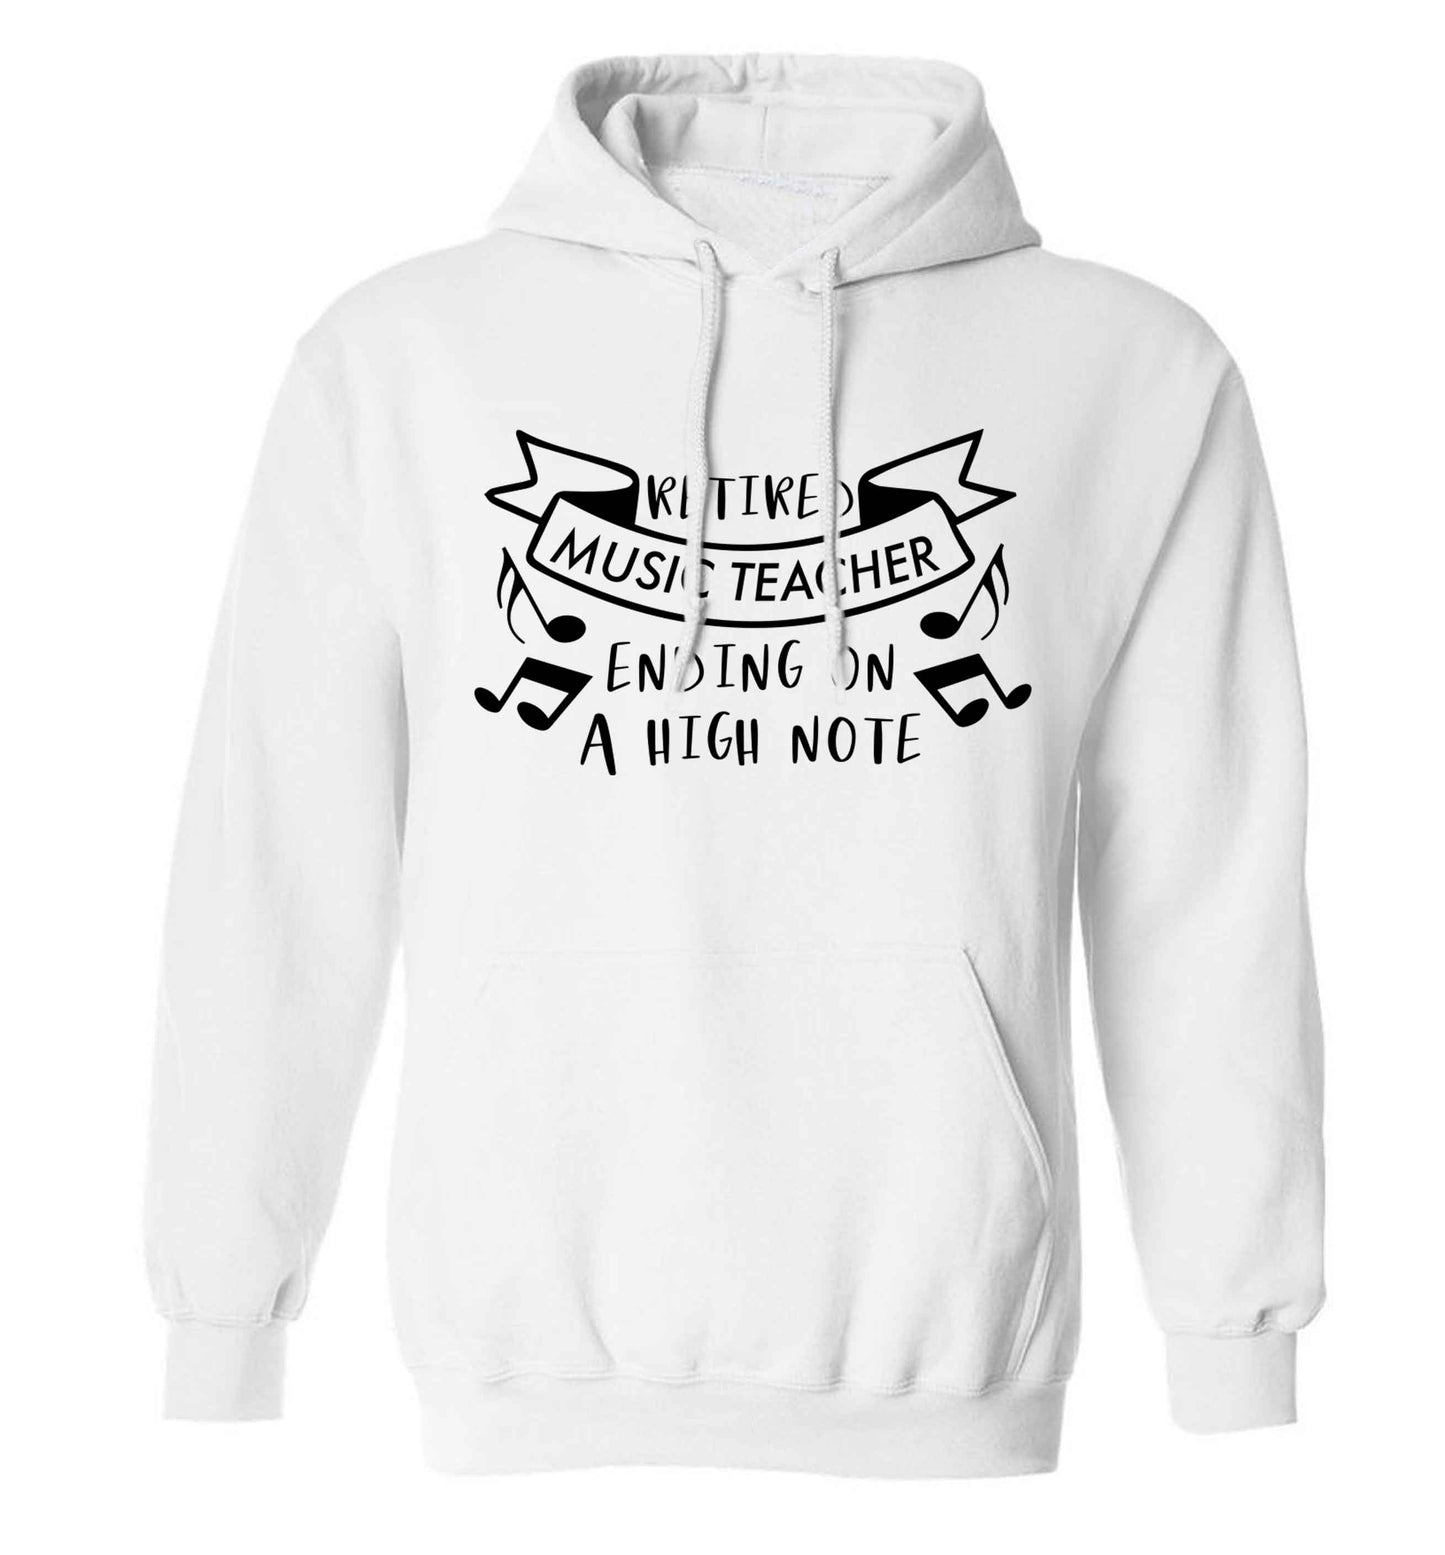 Retired music teacher ending on a high note adults unisex white hoodie 2XL